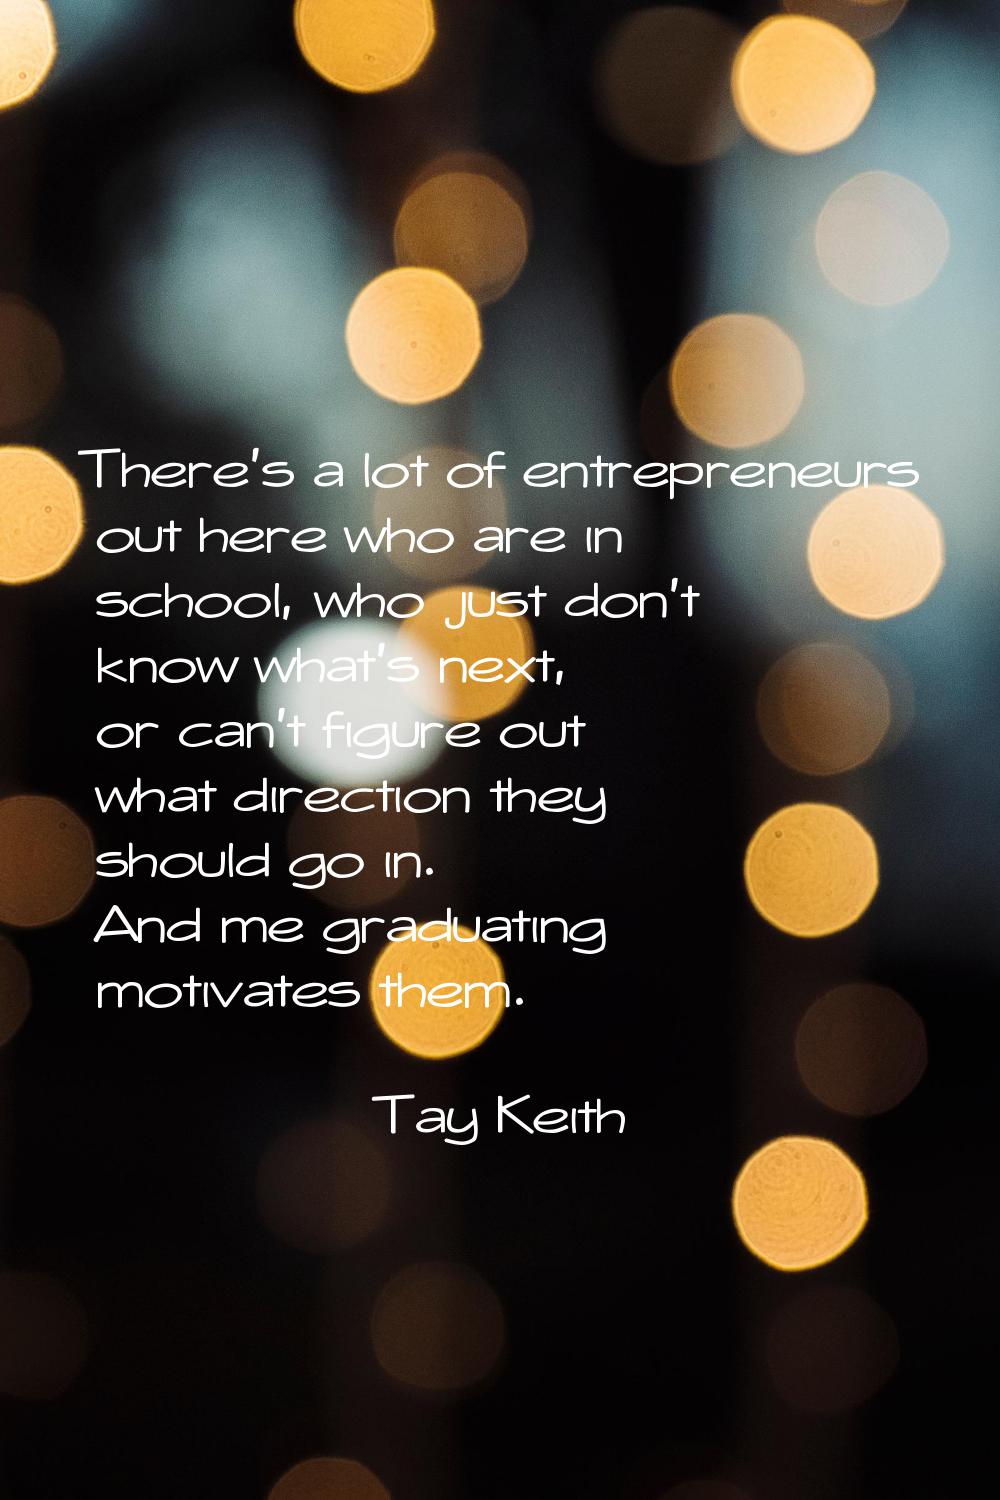 There's a lot of entrepreneurs out here who are in school, who just don't know what's next, or can'